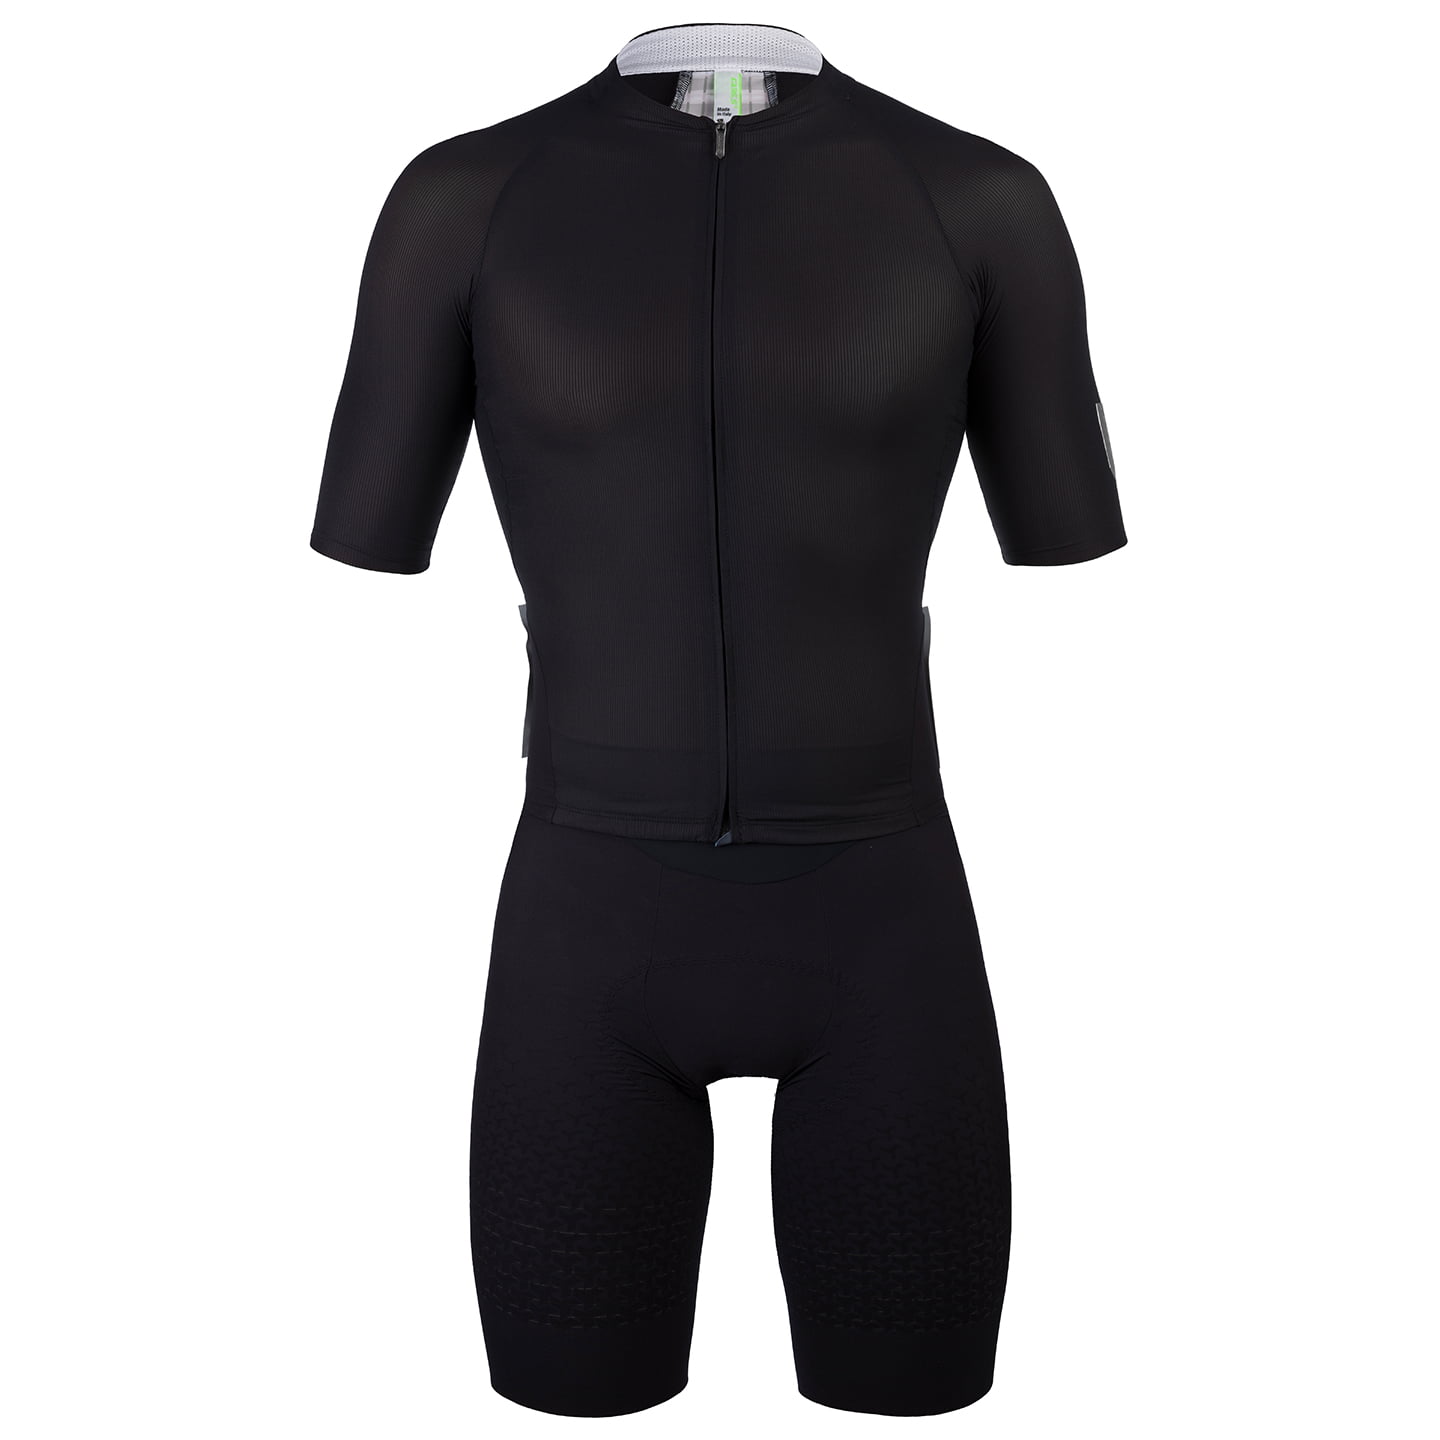 Q36.5 Clima Race Bodysuit, for men, size L, Cycling body, Cycle gear